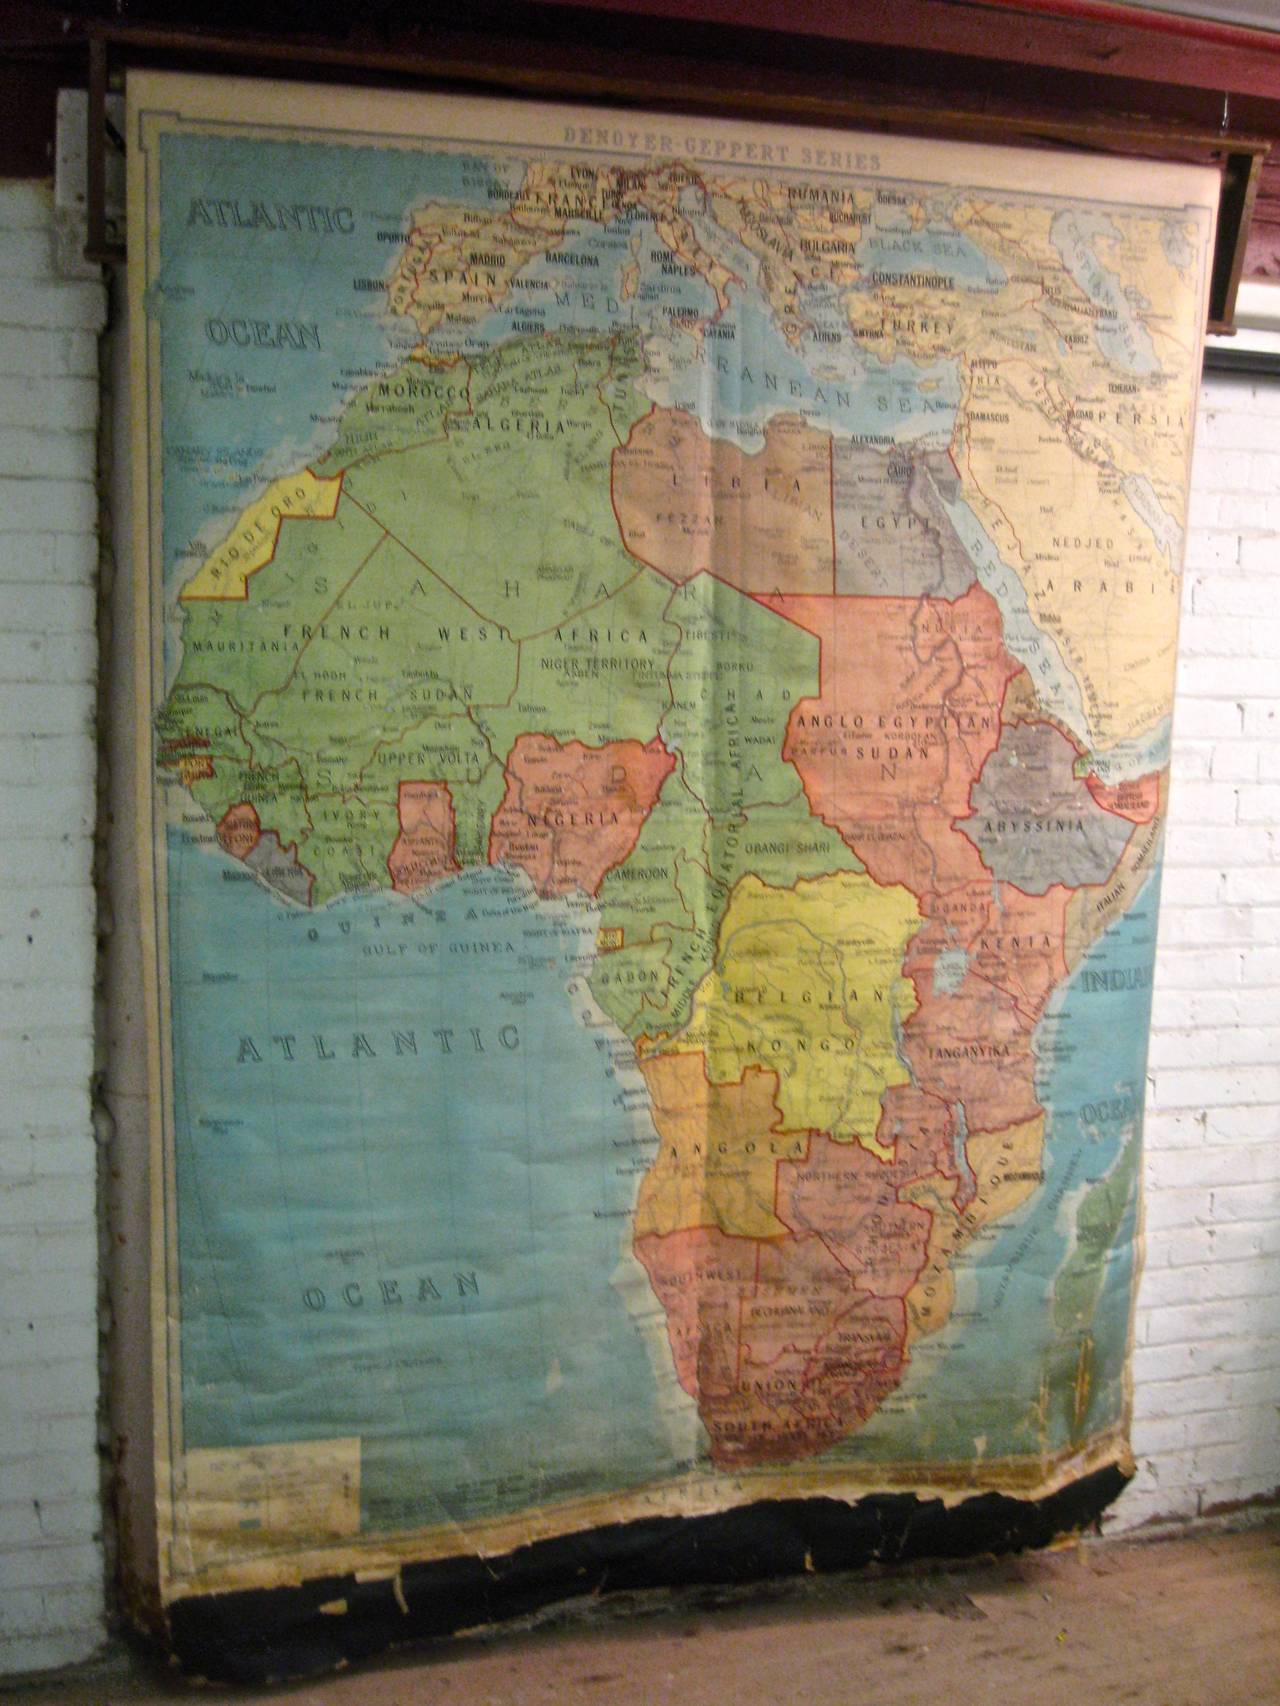 Amazing size and quality Denoyer-Geppert Map of Africa. Africa's strong colonial influences and exploiters are still fully evident and give a great history lesson. Belgian Kongo, Italian Somaliland, French Sudan, Tanganyika, Abyssinia, Rio de Oro